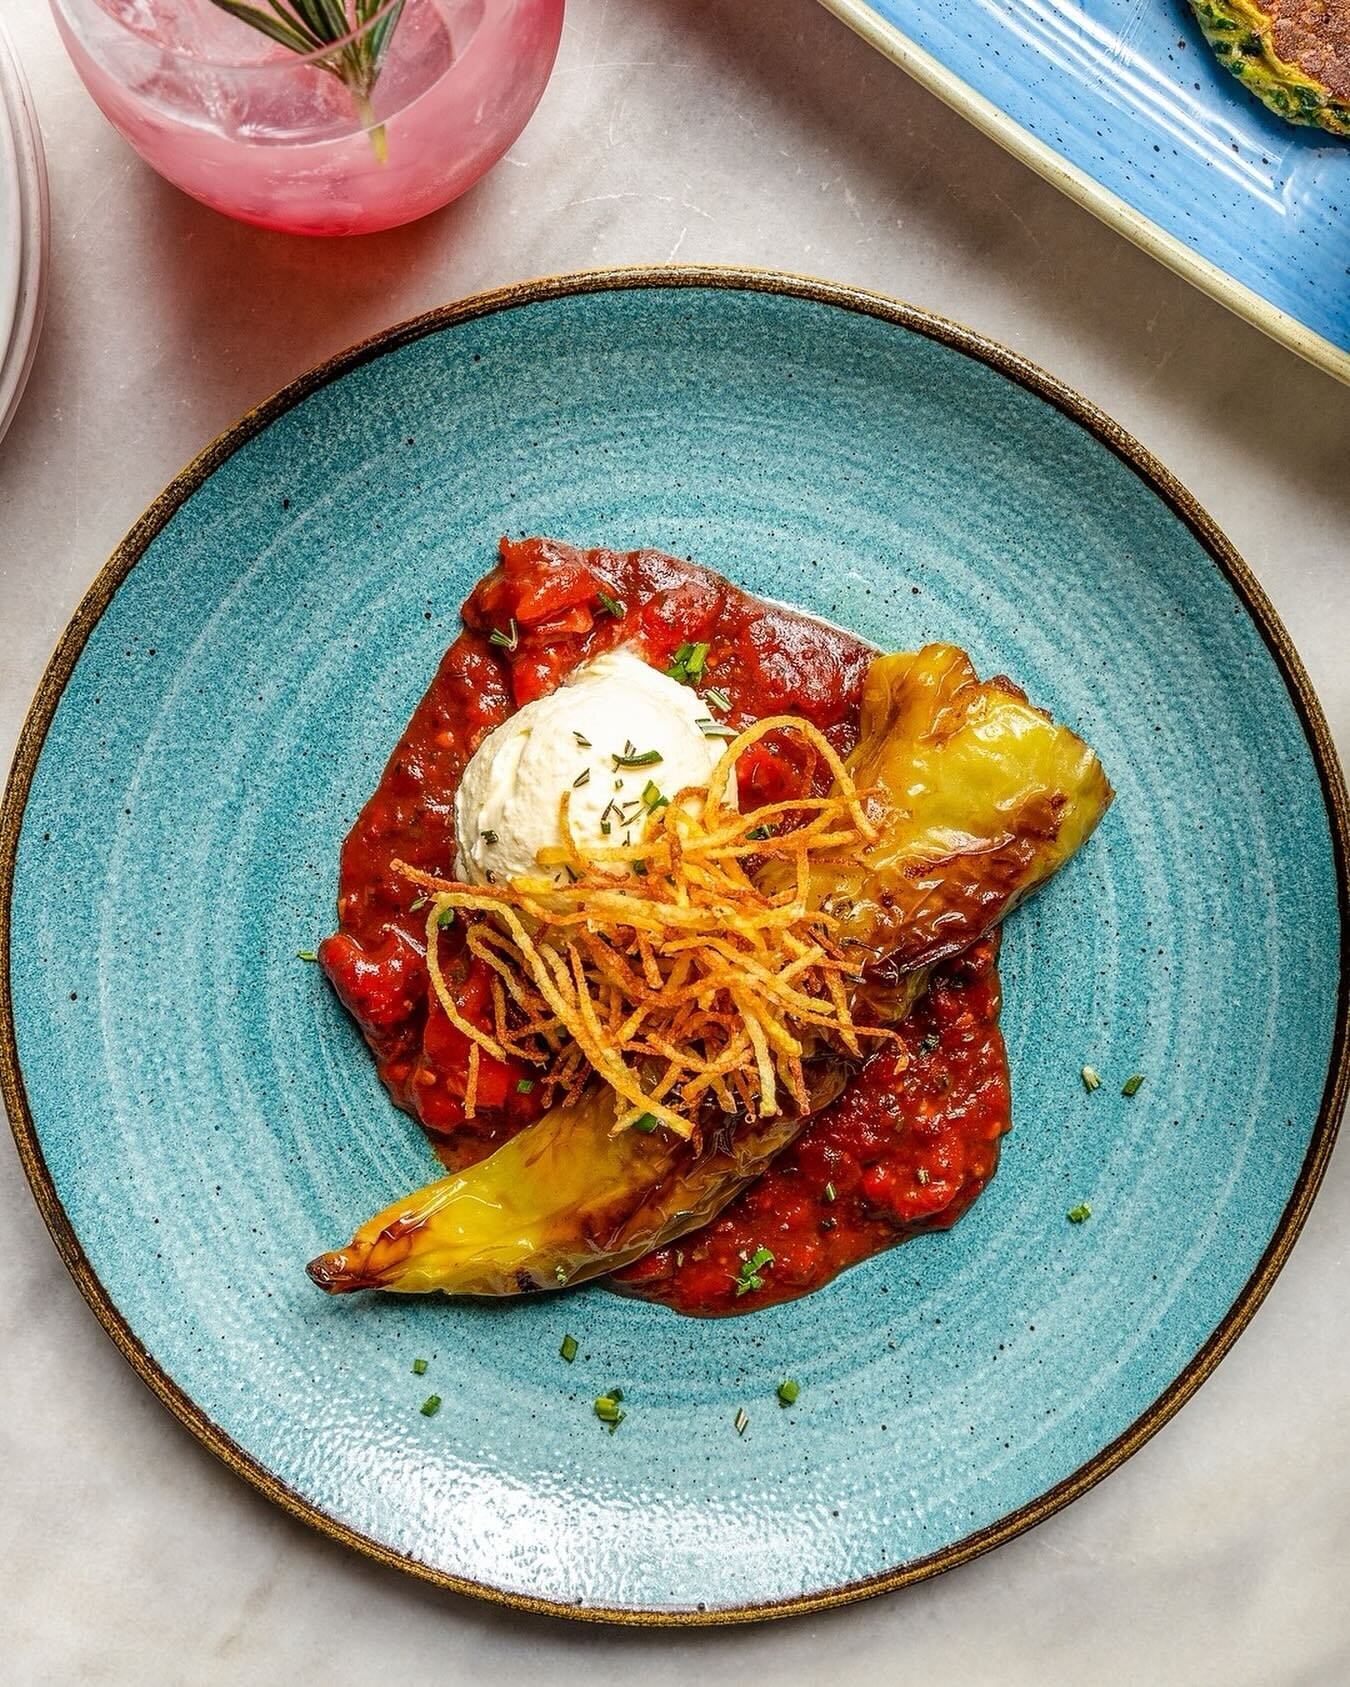 😍 Introducing a delightful addition to our array of small plates:

Indulge in our delectable Stuffed Peppers featuring housemade sweet Italian sausage, rich tomato veal demi-glace, and creamy ricotta cheese.

This savory delight is available on our 